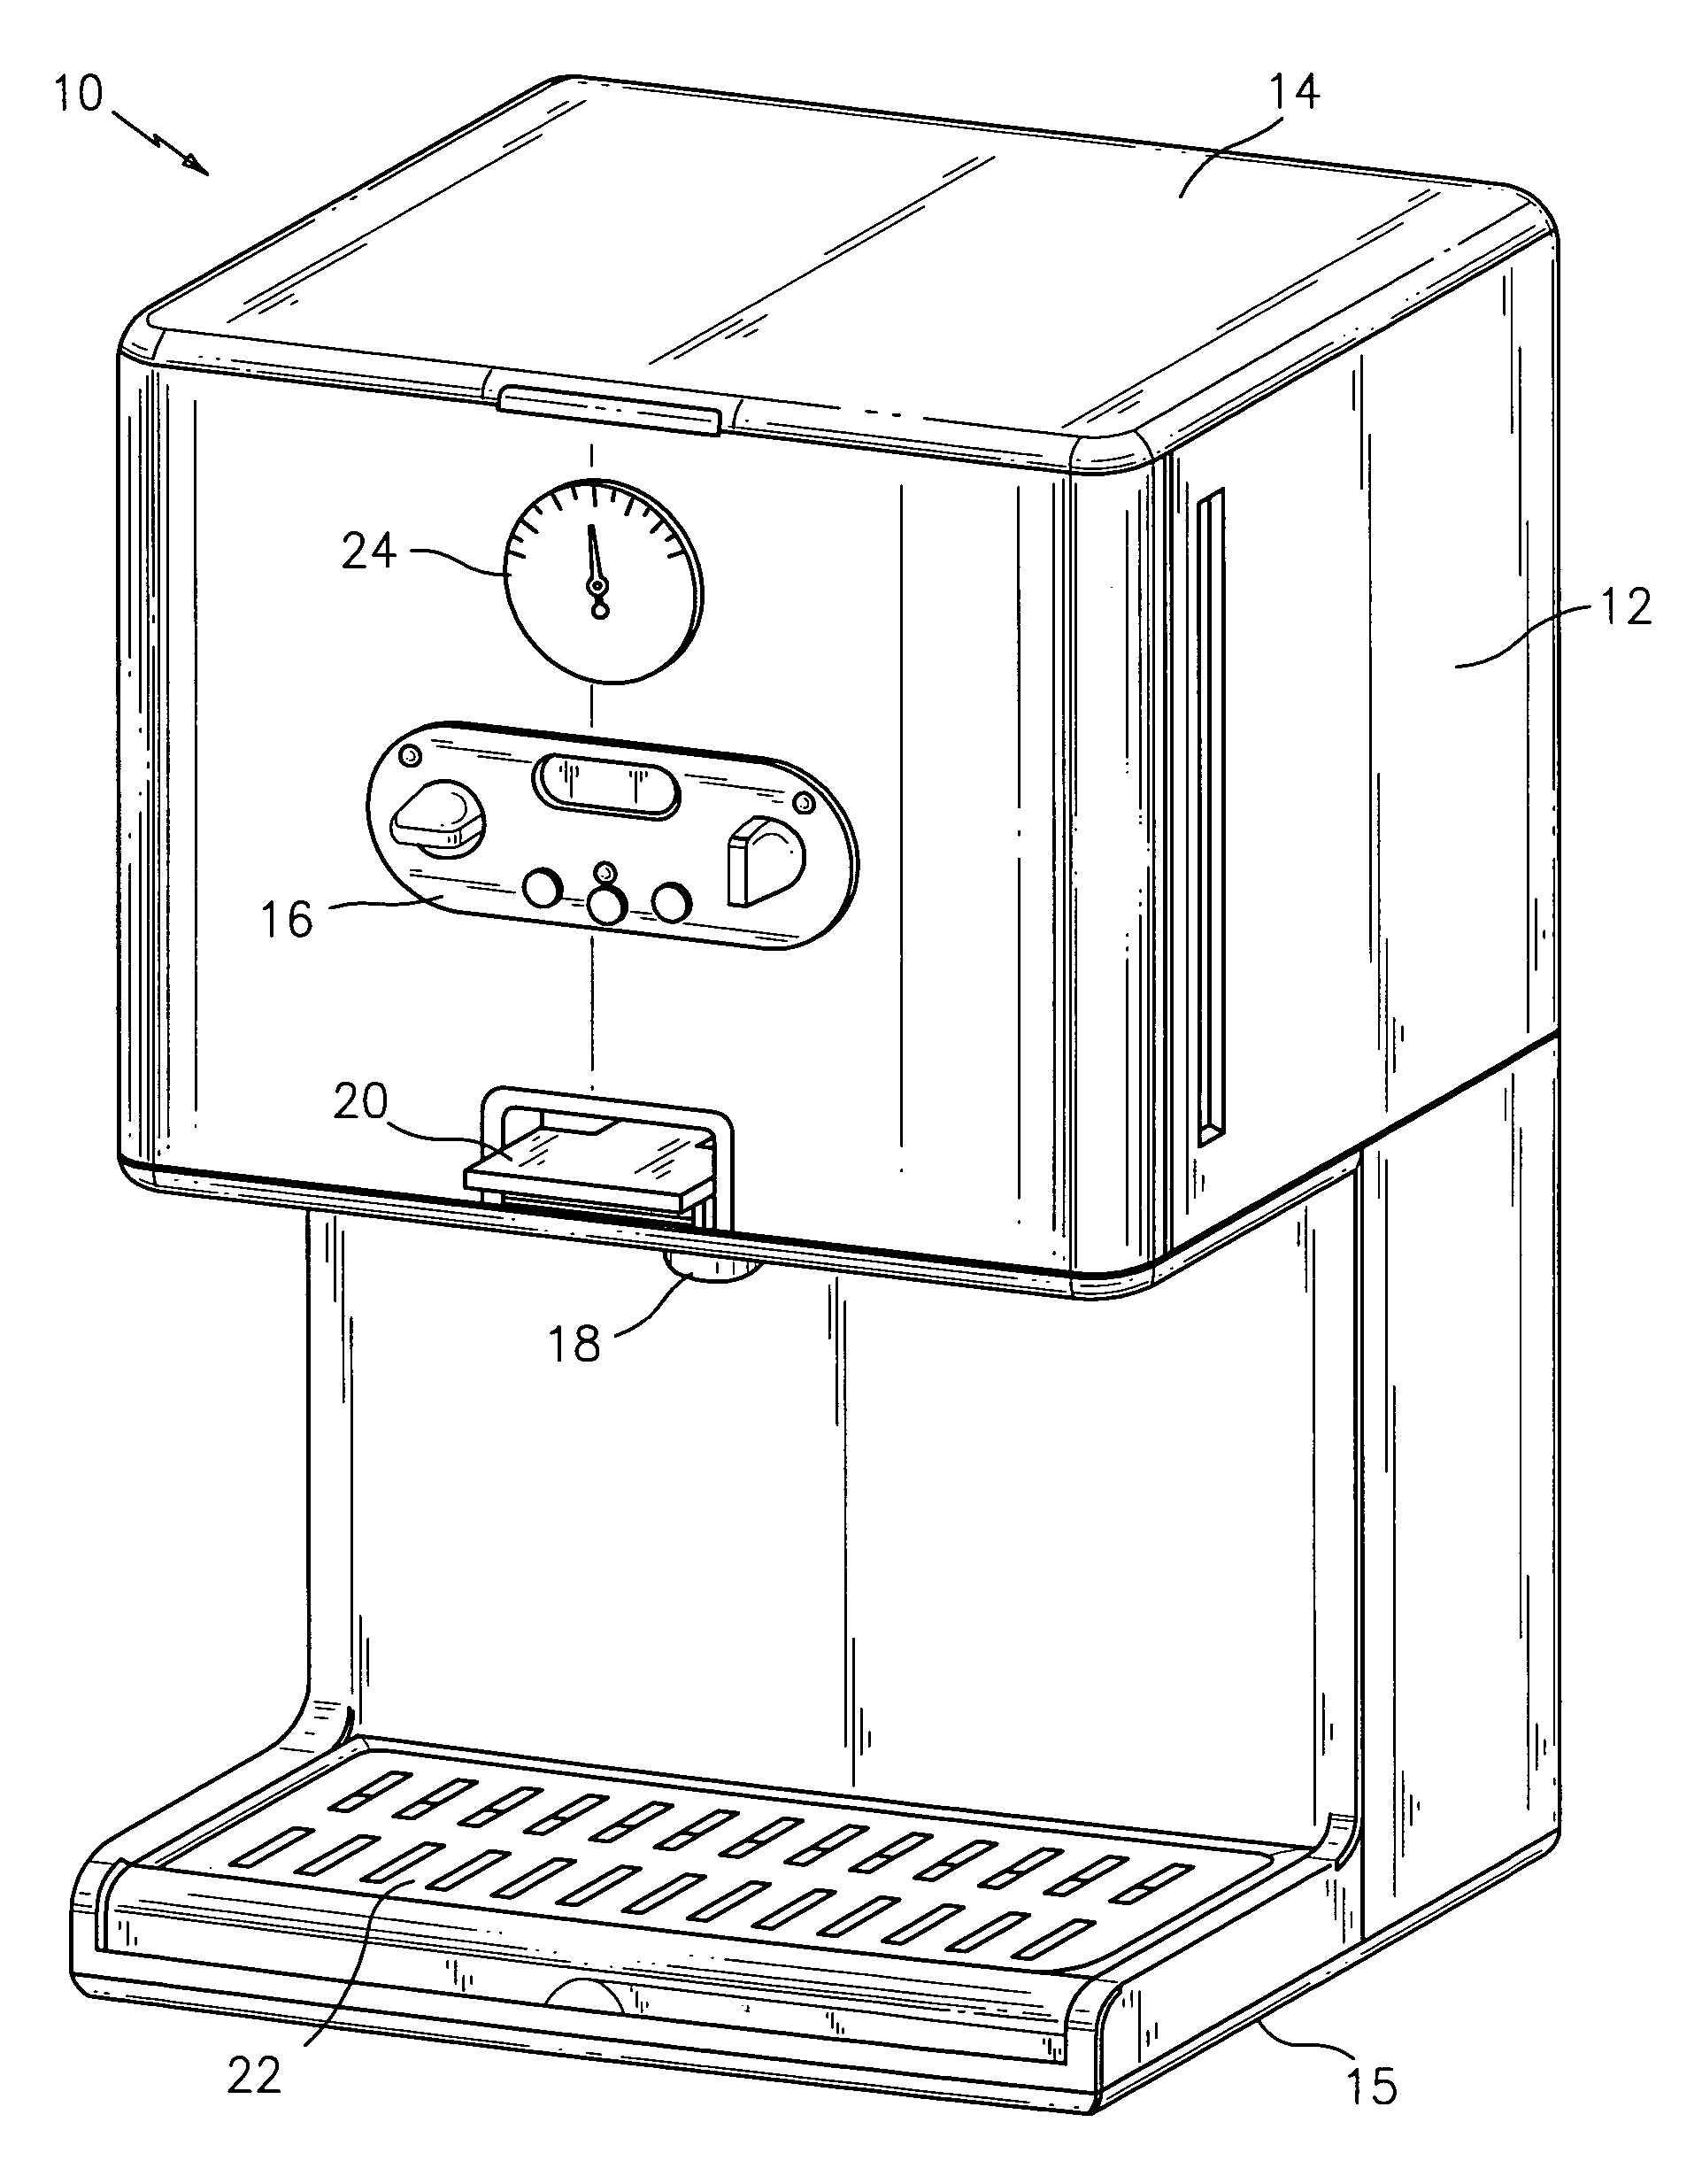 Coffee maker with mechanical coffee level indicator